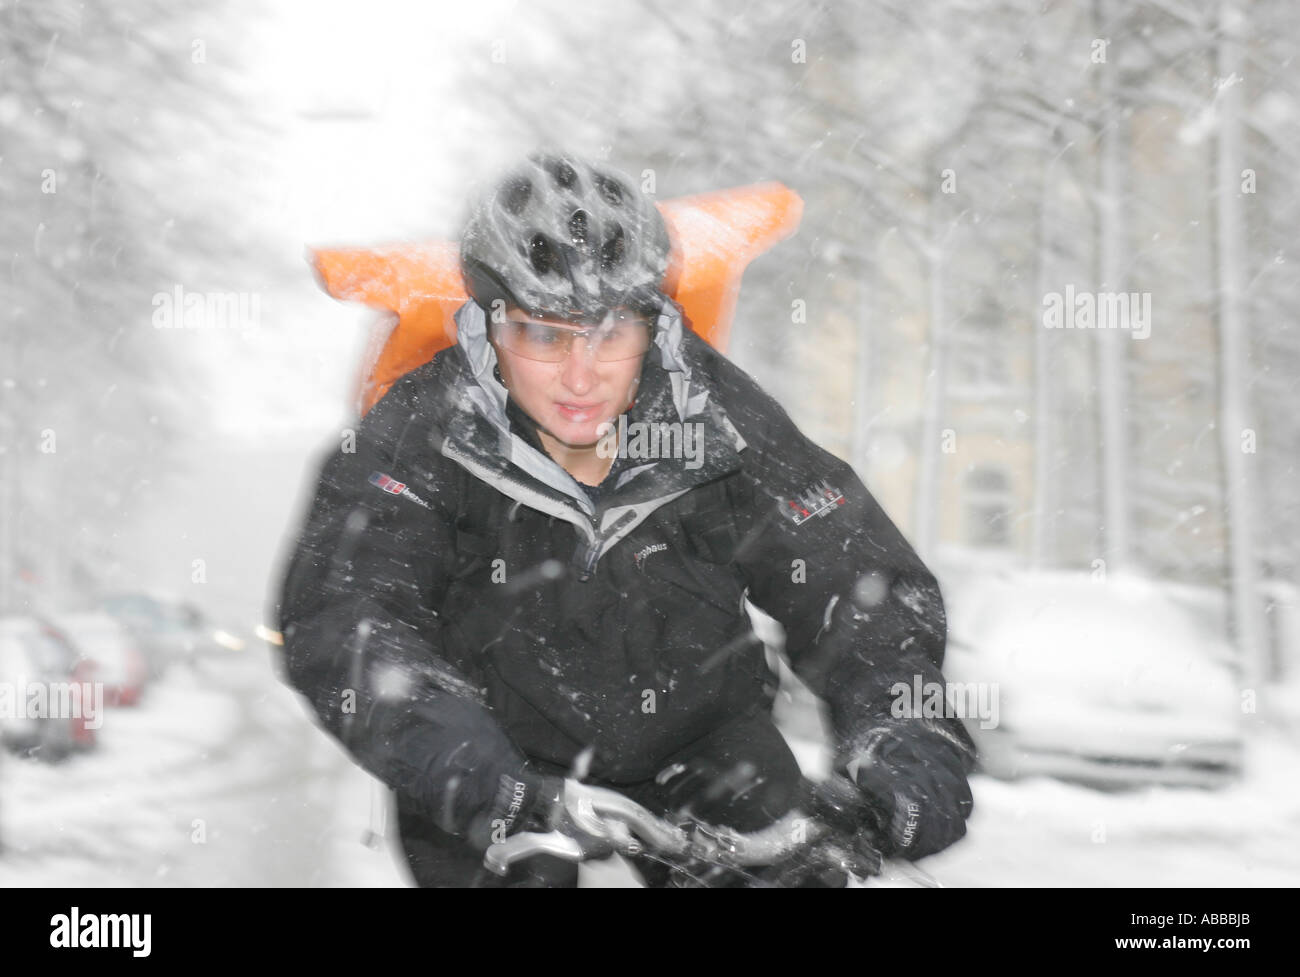 Bicycle courier in winter Munich Bavaria Germany Europe Stock Photo